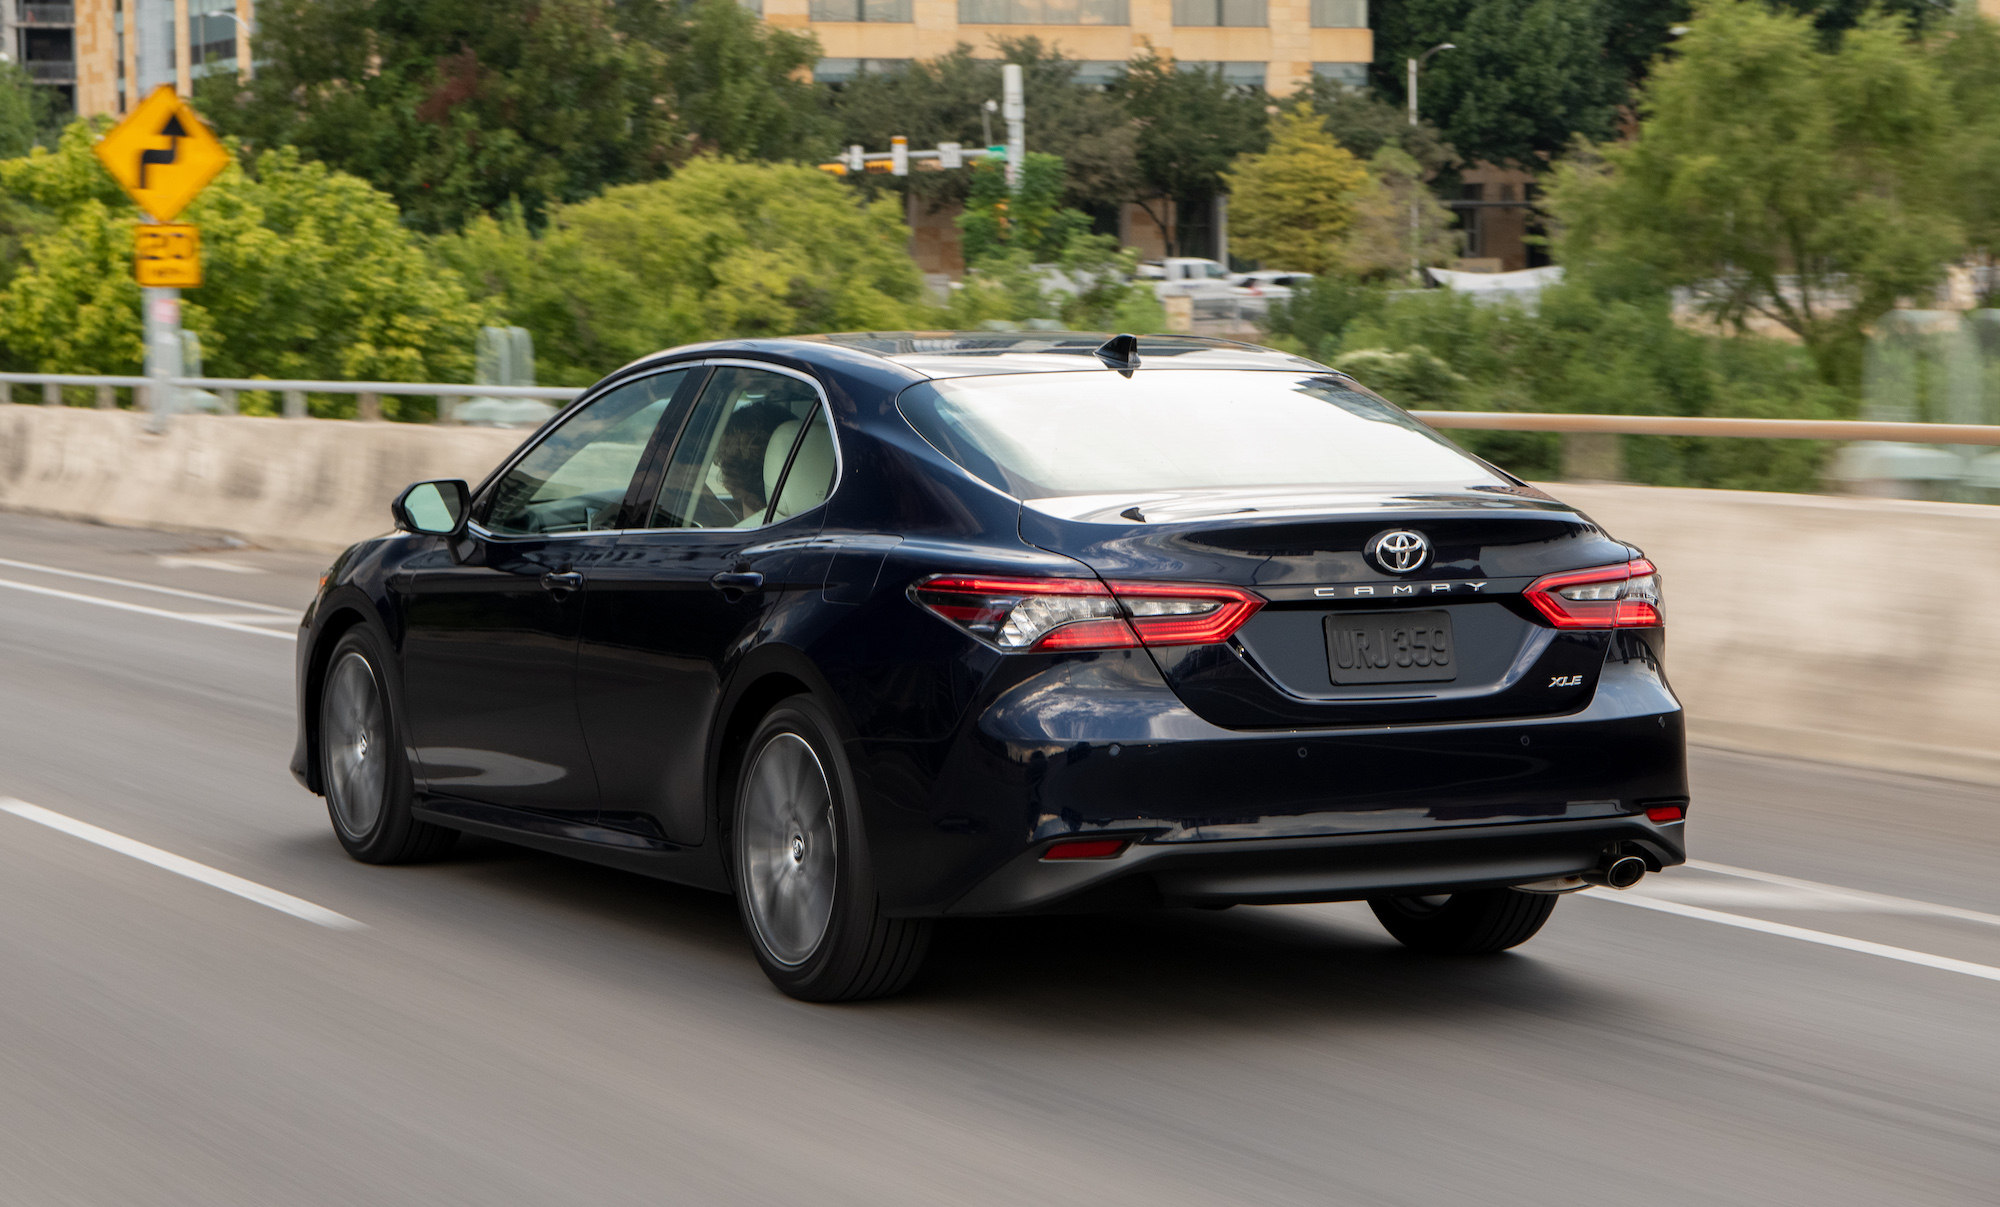 The 2021 Toyota Camry Gives You Fuel Efficiency and All-Wheel Drive